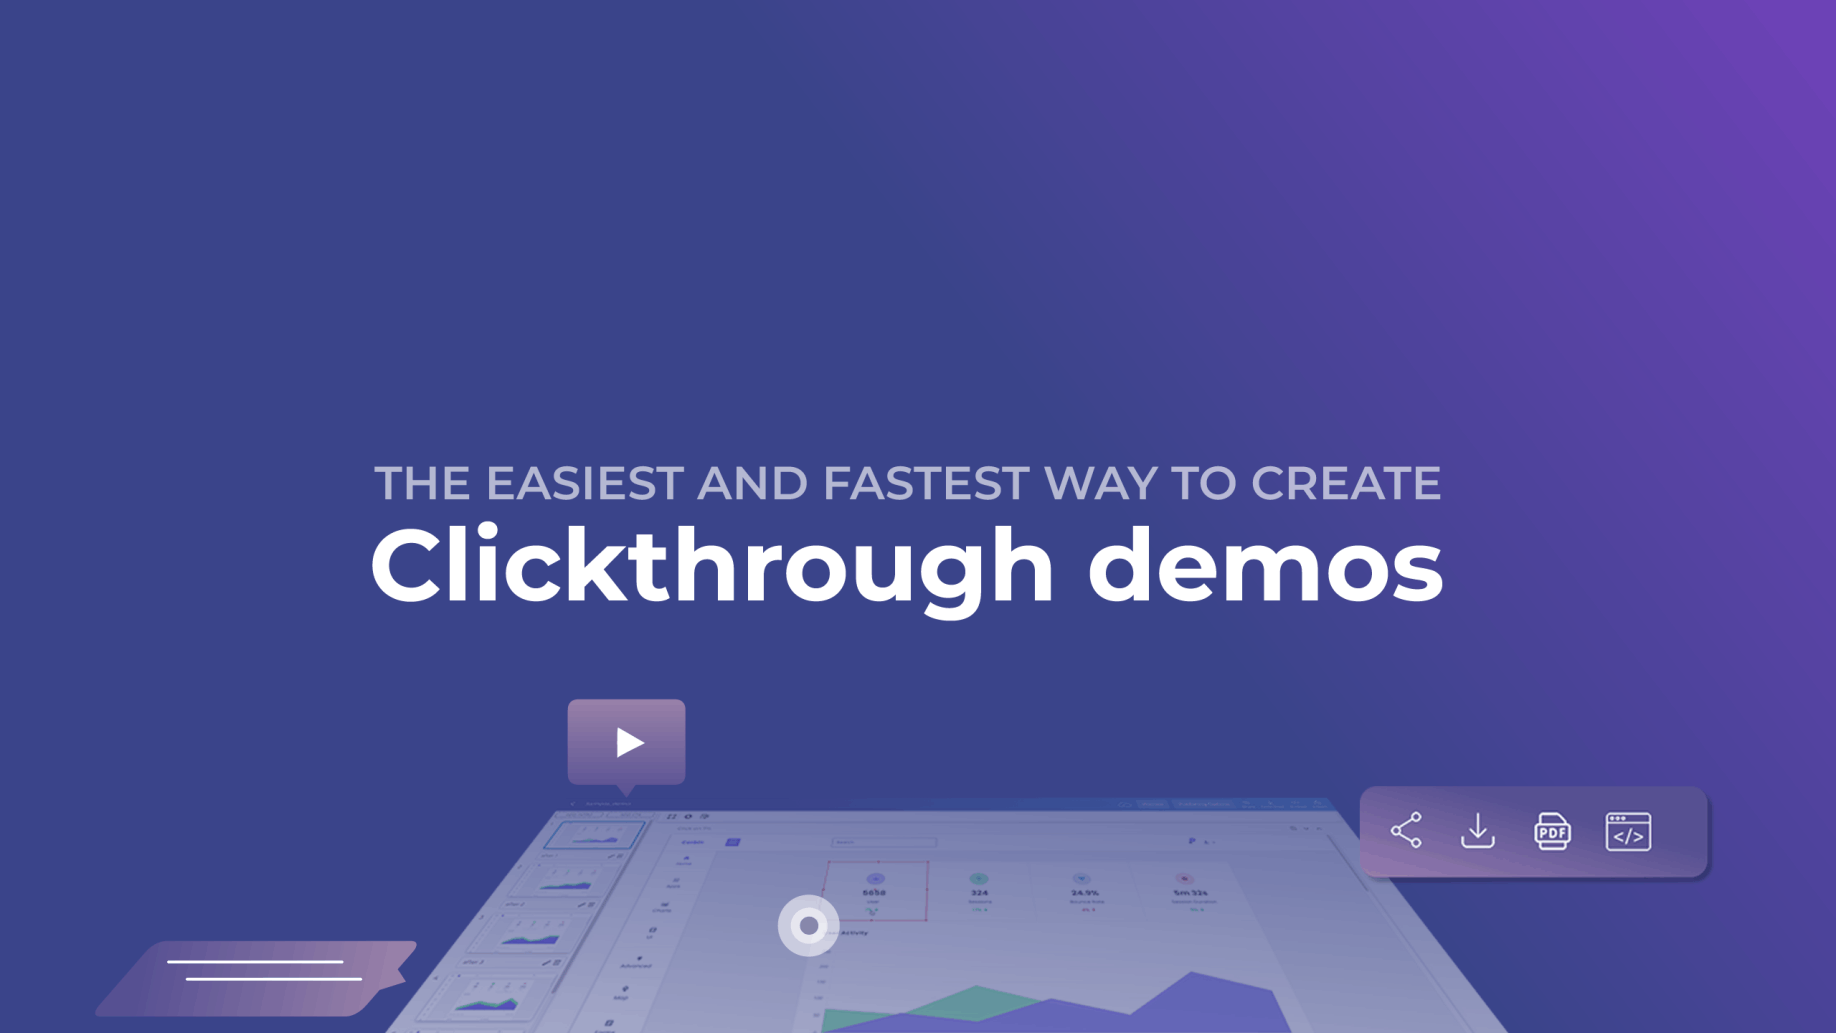 The easiest and fastest way to create interactive clickthrough demos